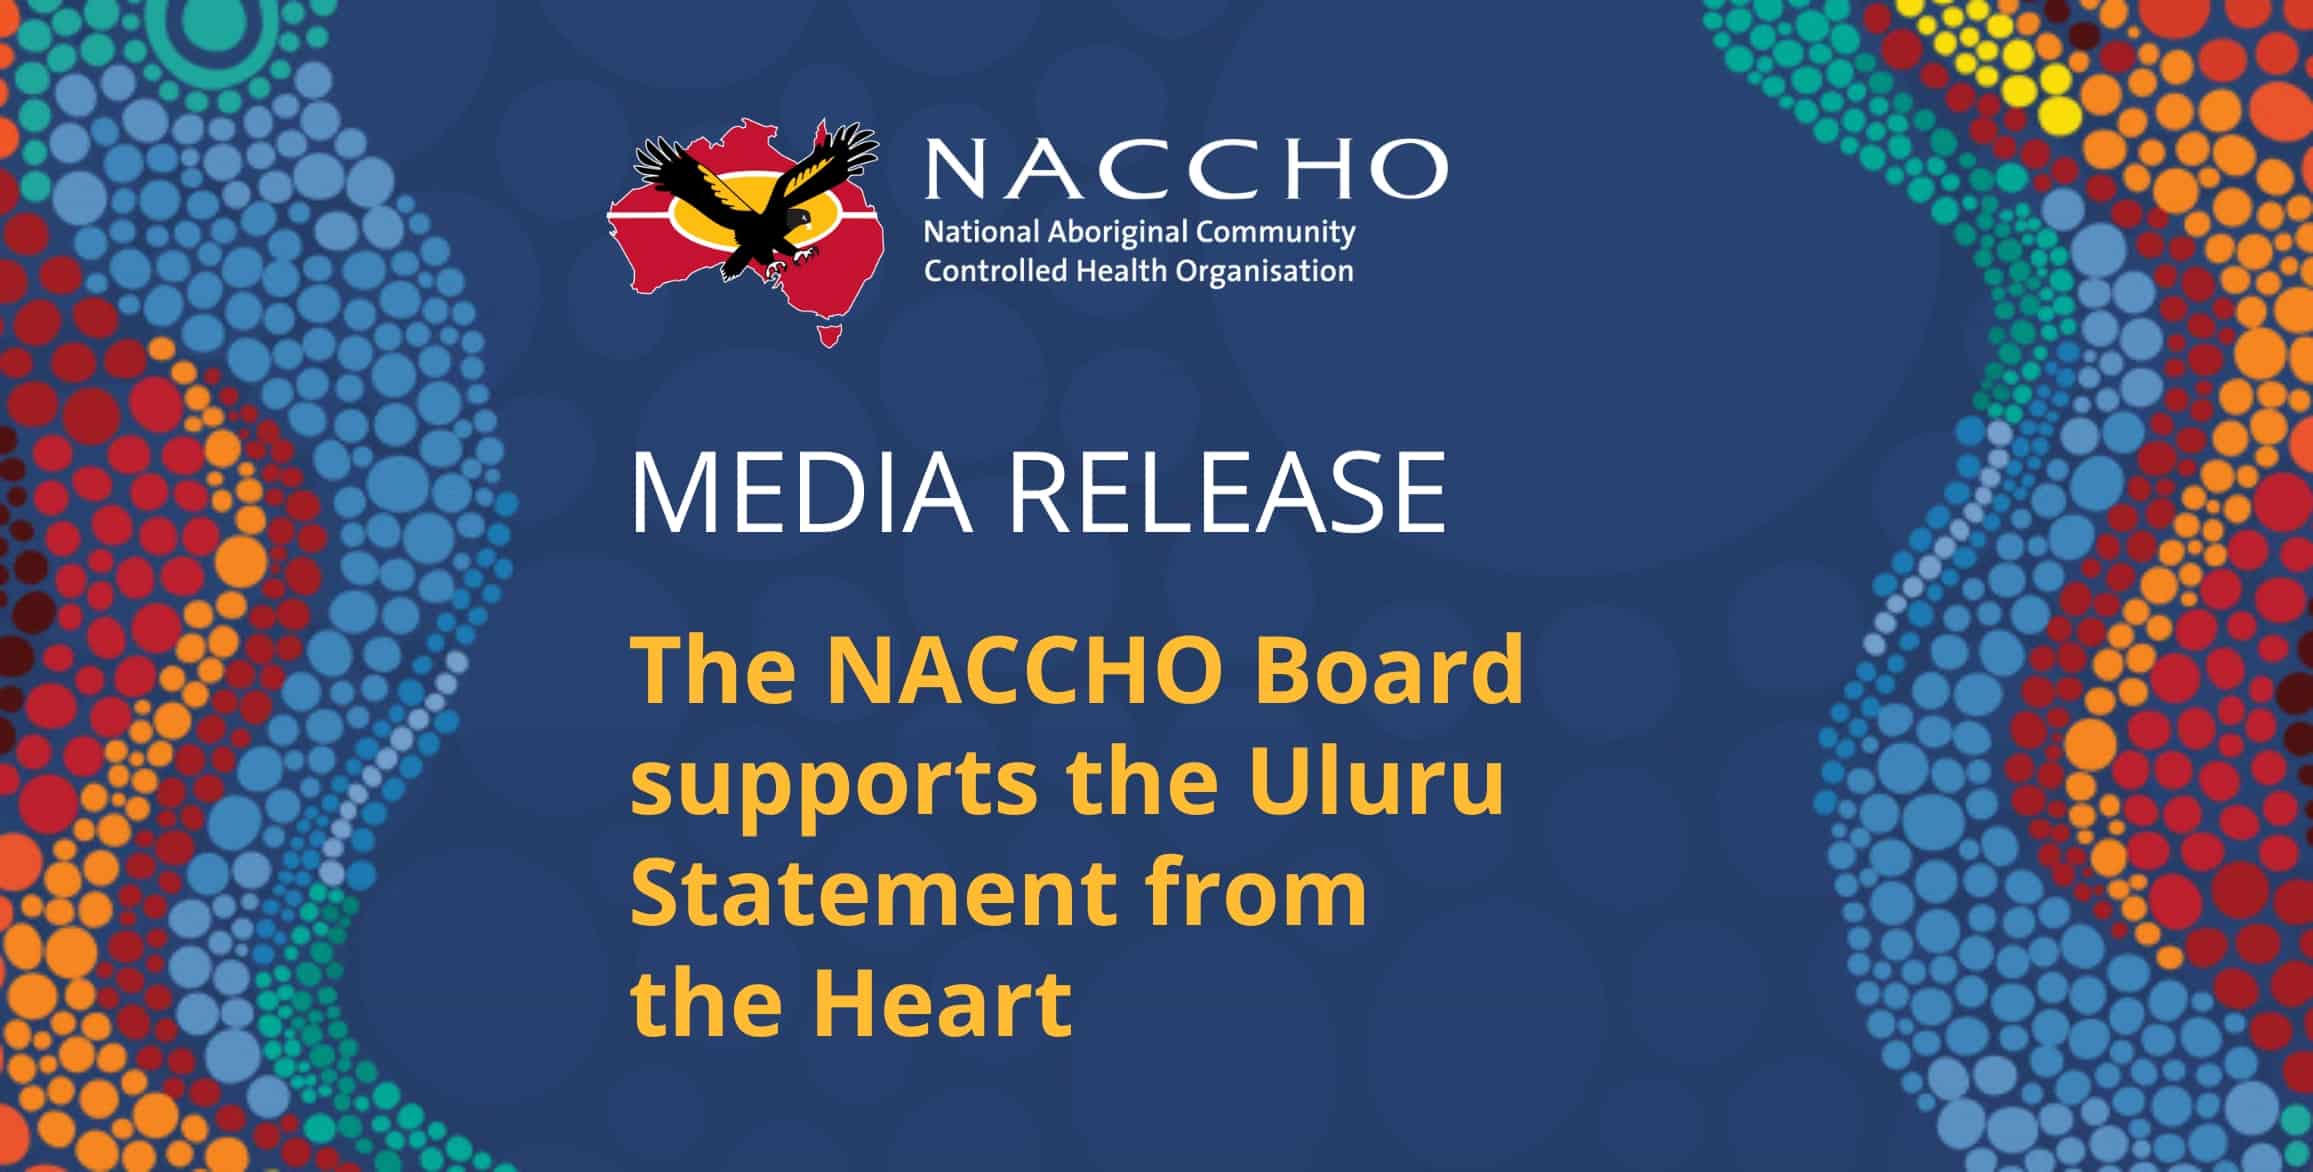 NACCHO Media Release: The NACCHO Board supports the Uluru Statement from the Heart